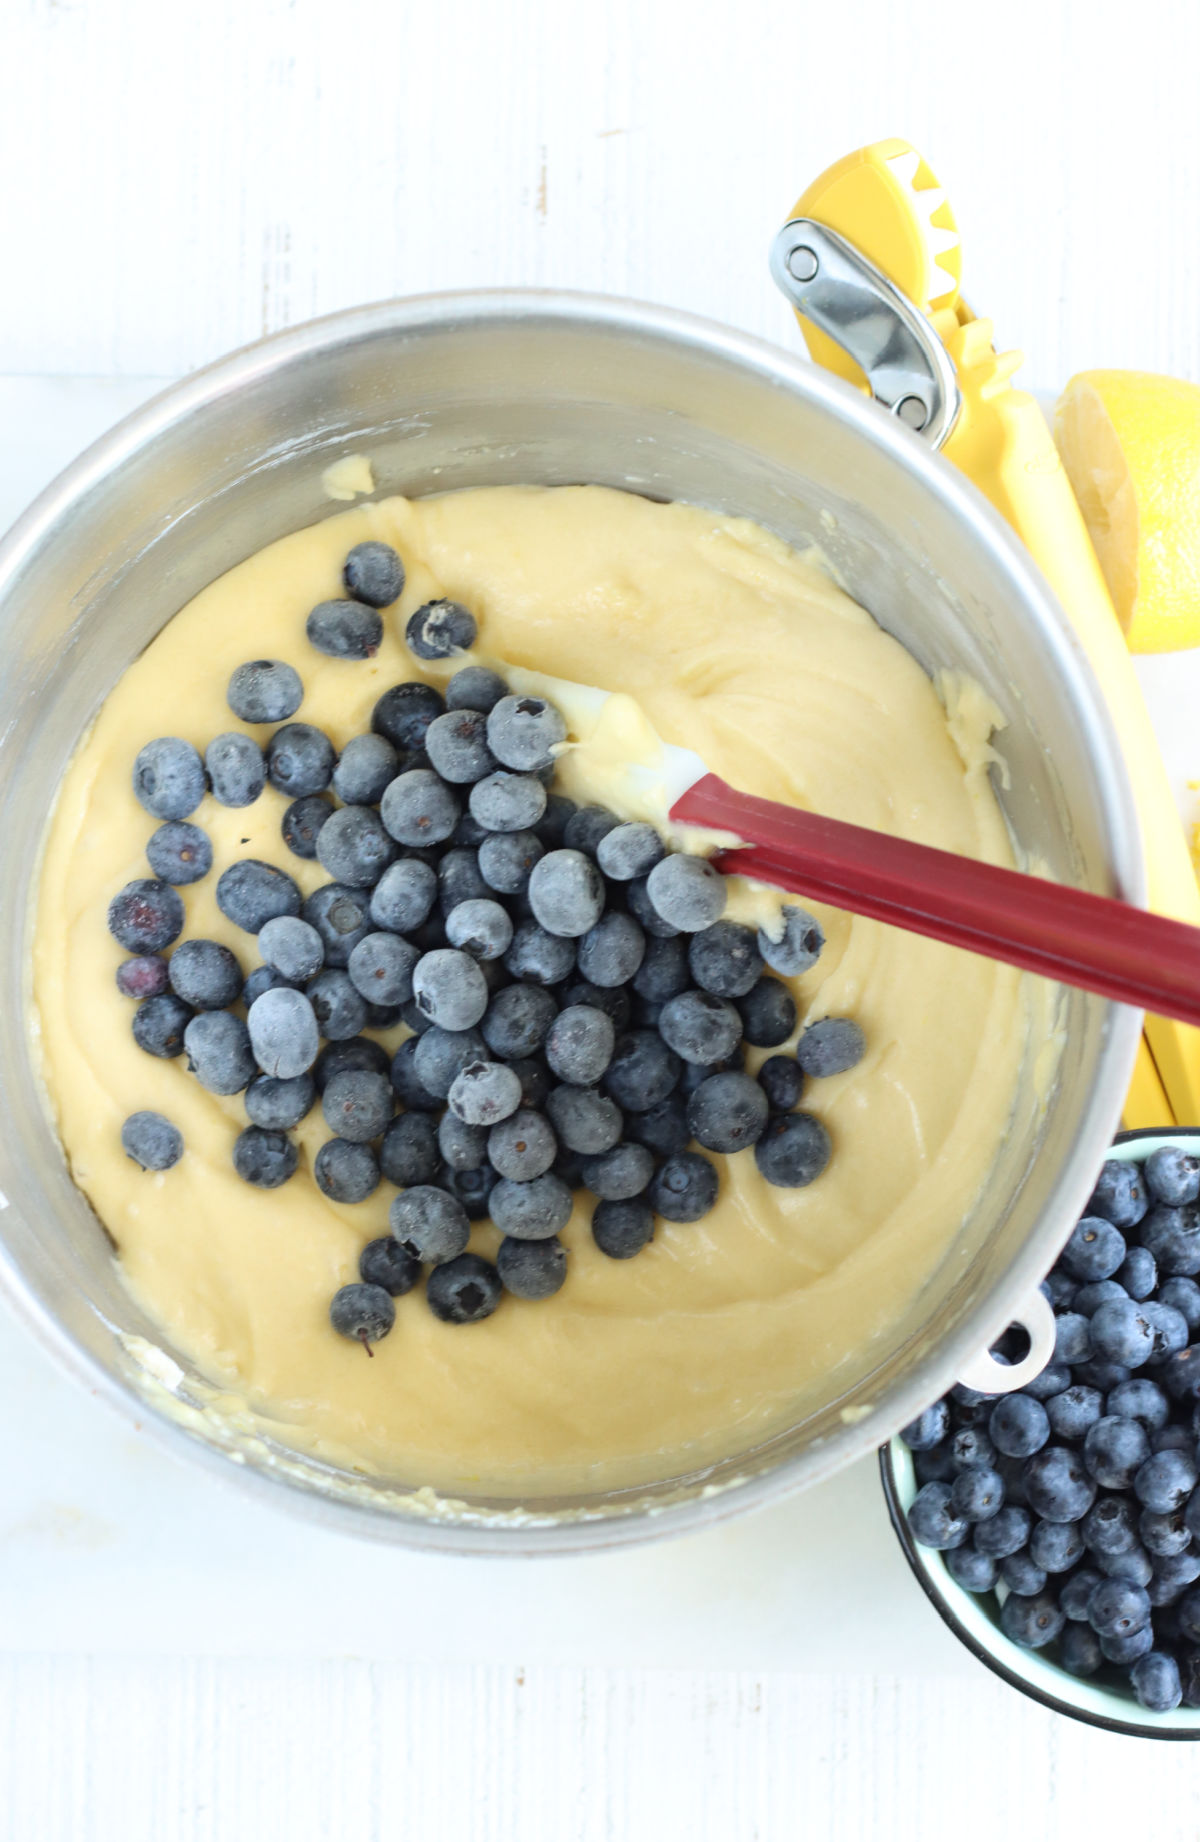 Lemon cake batter in metal mixing bowl with red handle spatula in bowl, fresh blueberries in small bowl to right.